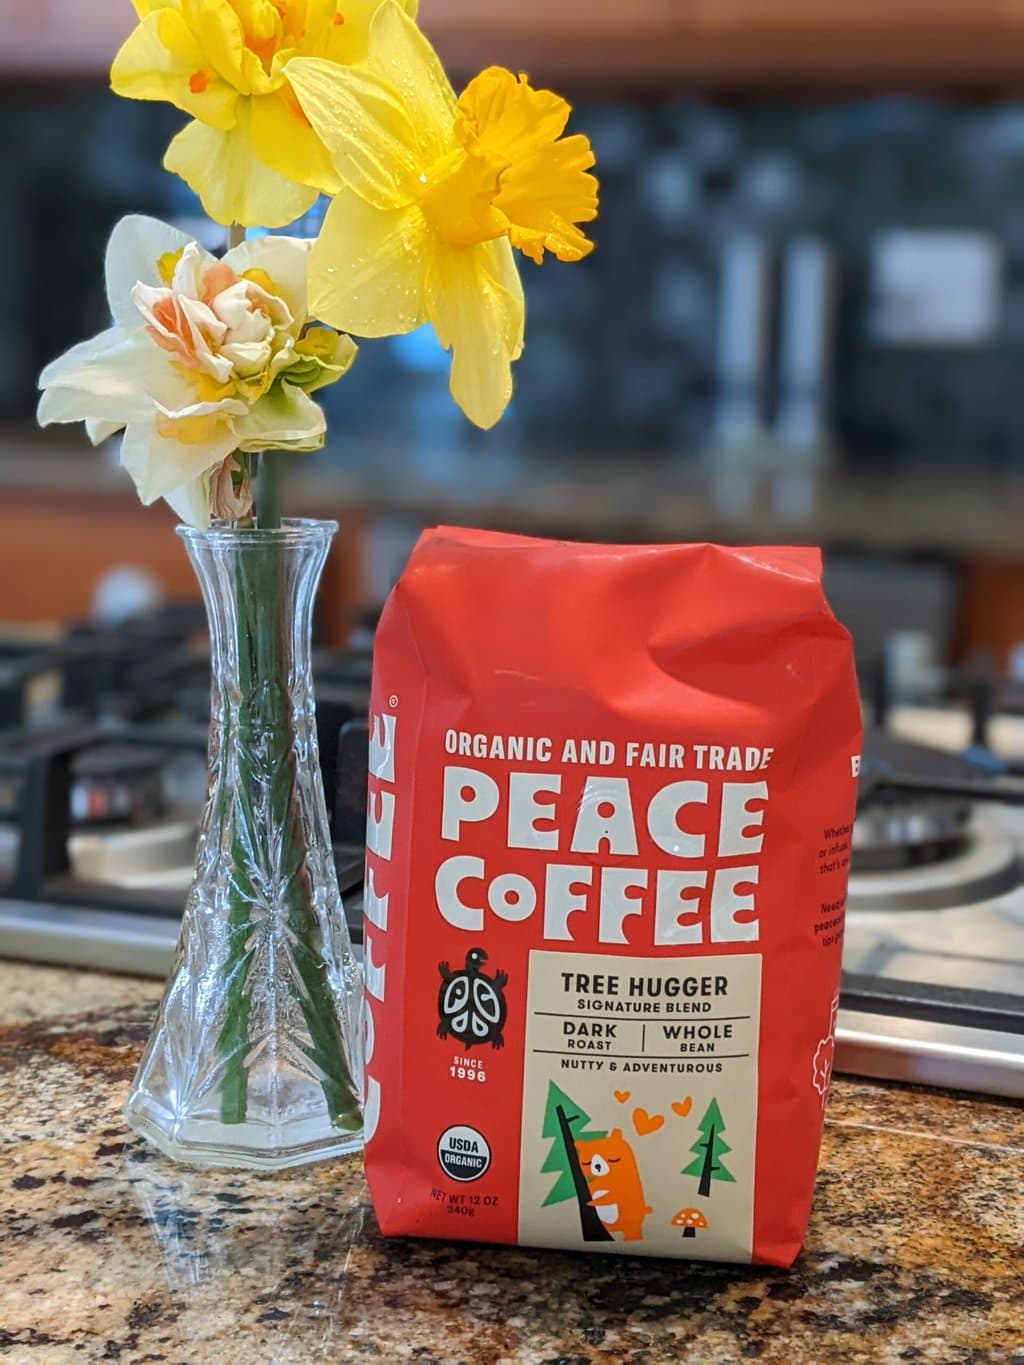 On the kitchen table, next to a vase with daffodils, there is a package of Peace Coffee Tree Hugger Signature Blend Dark Roast